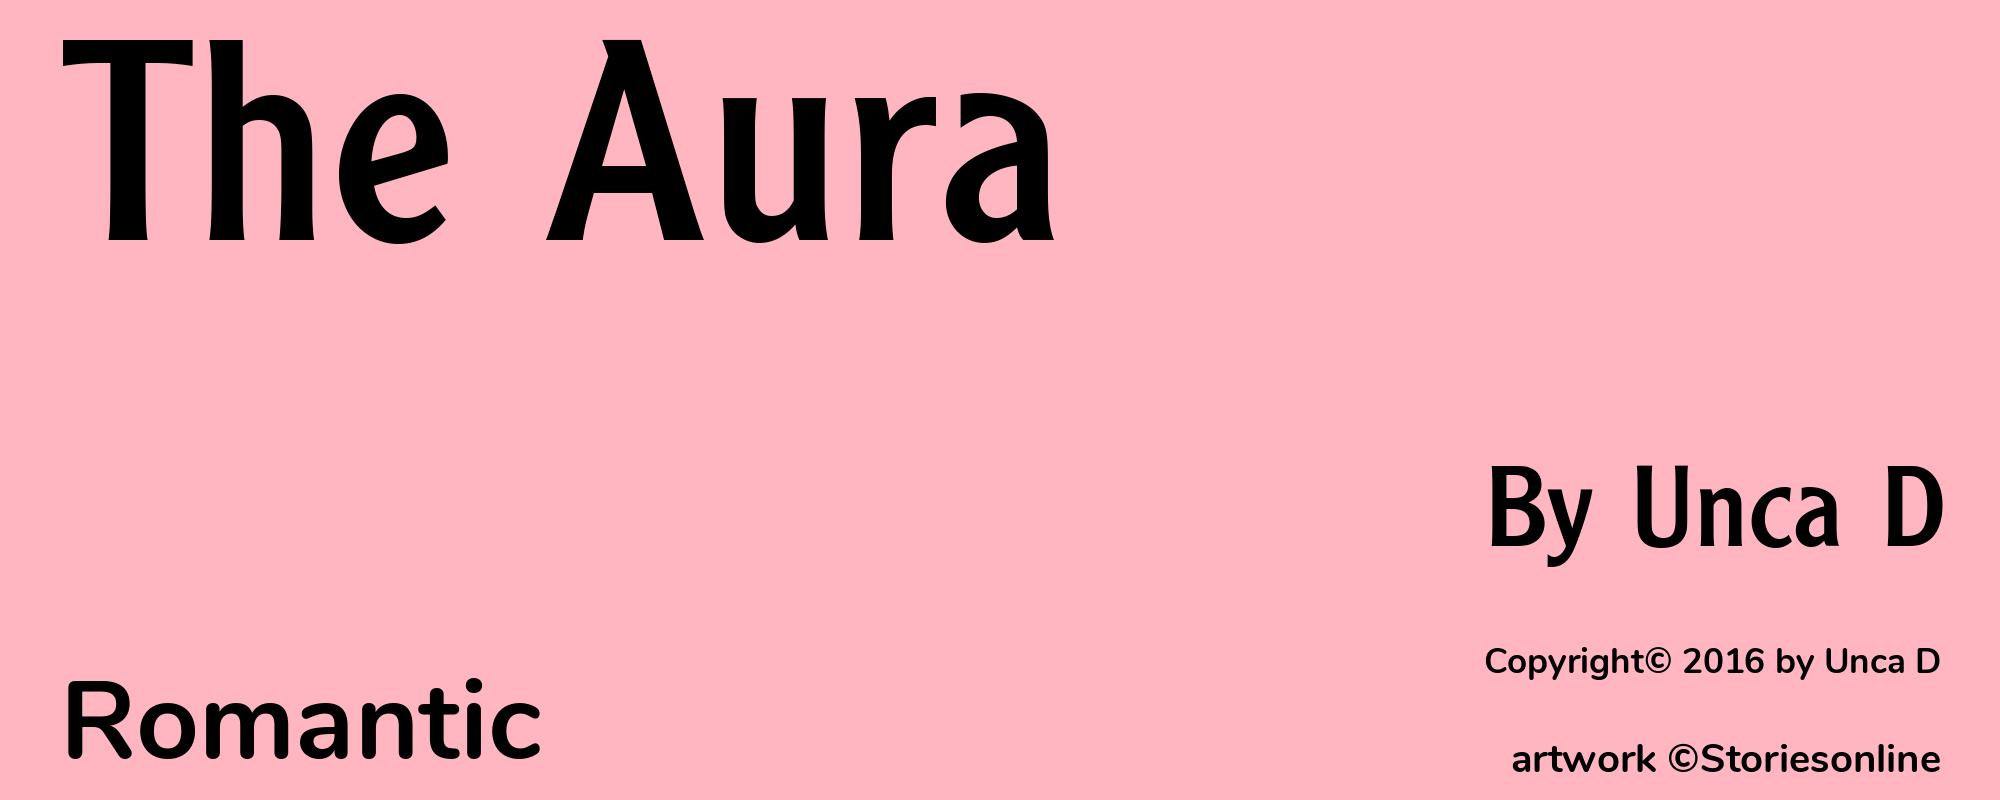 The Aura - Cover